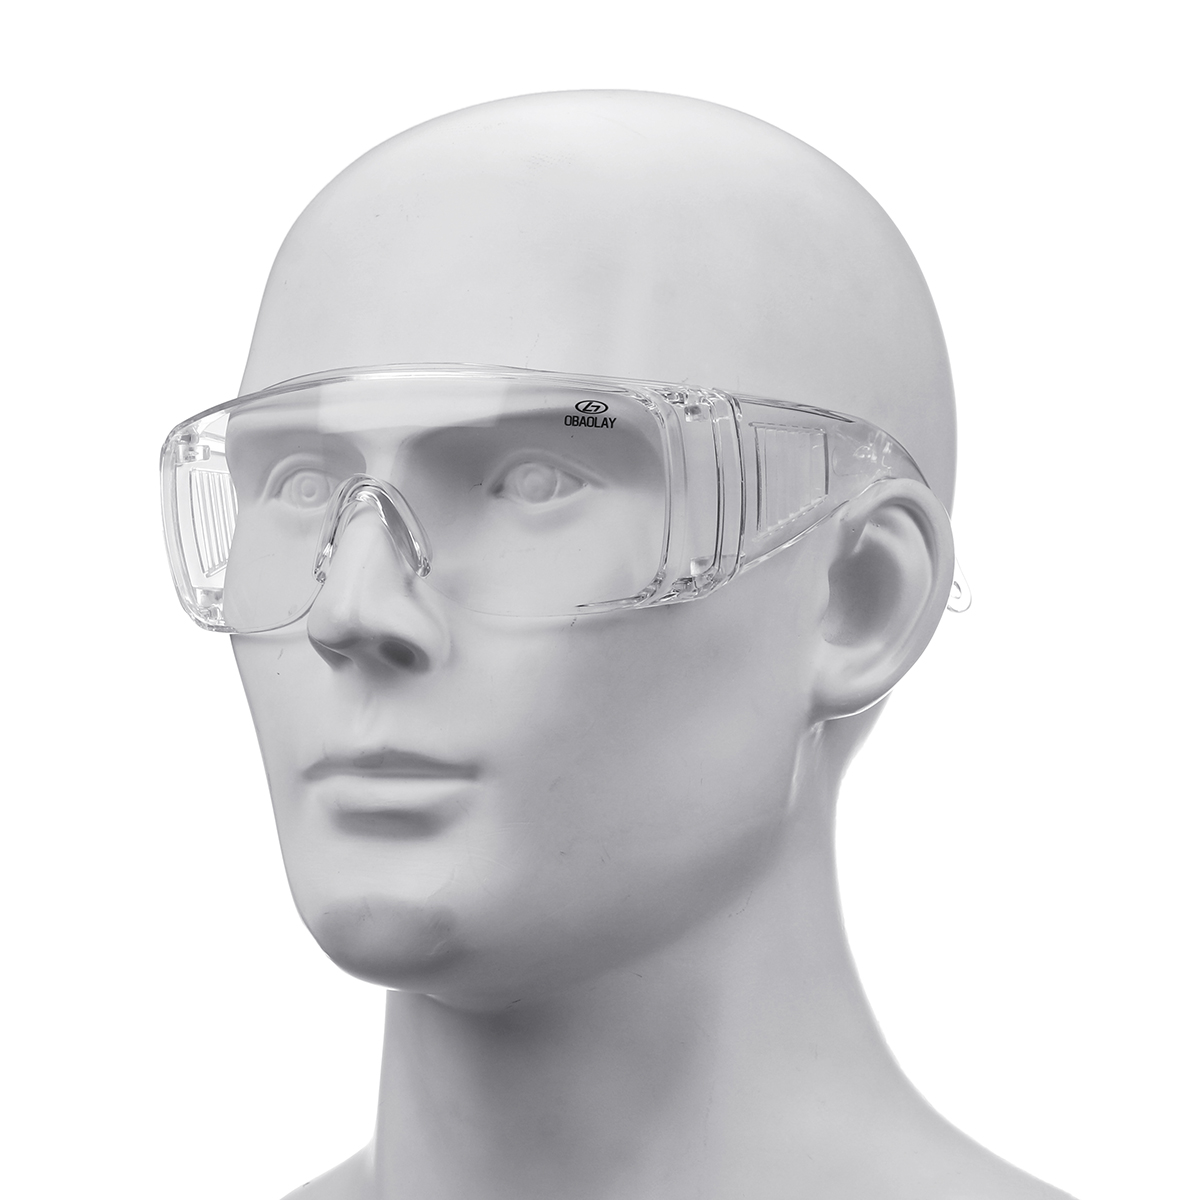 Industrial-Agricultural-or-Laboratory-Safety-Glasses--Protective-Glasses-Dustproof-Glasses-Protectiv-1900132-1